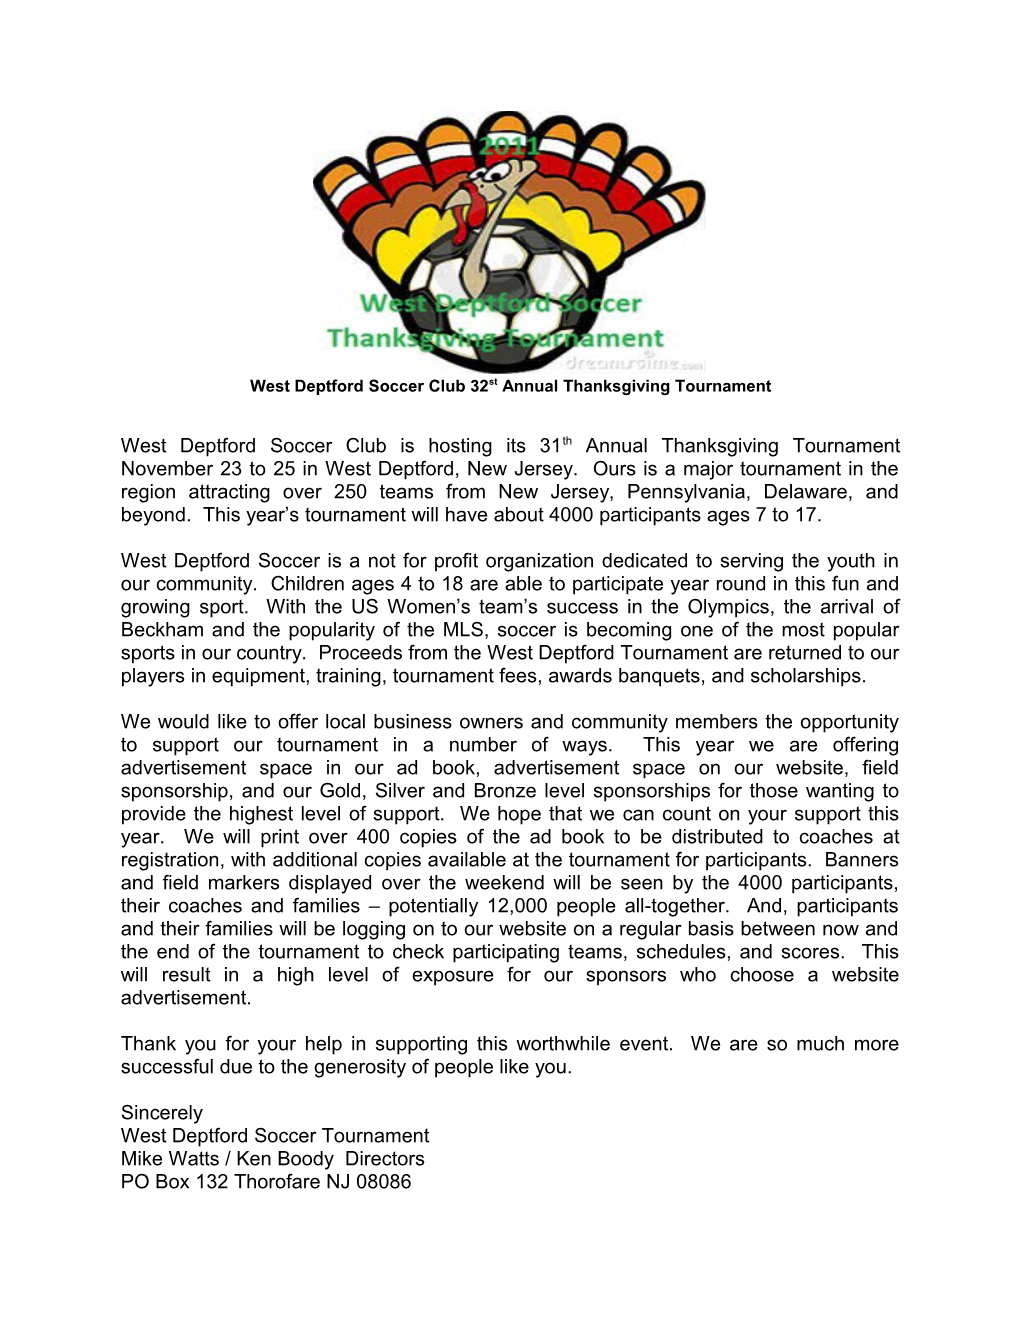 West Deptford Soccer Club 24Th Annual Thanksgiving Tournament